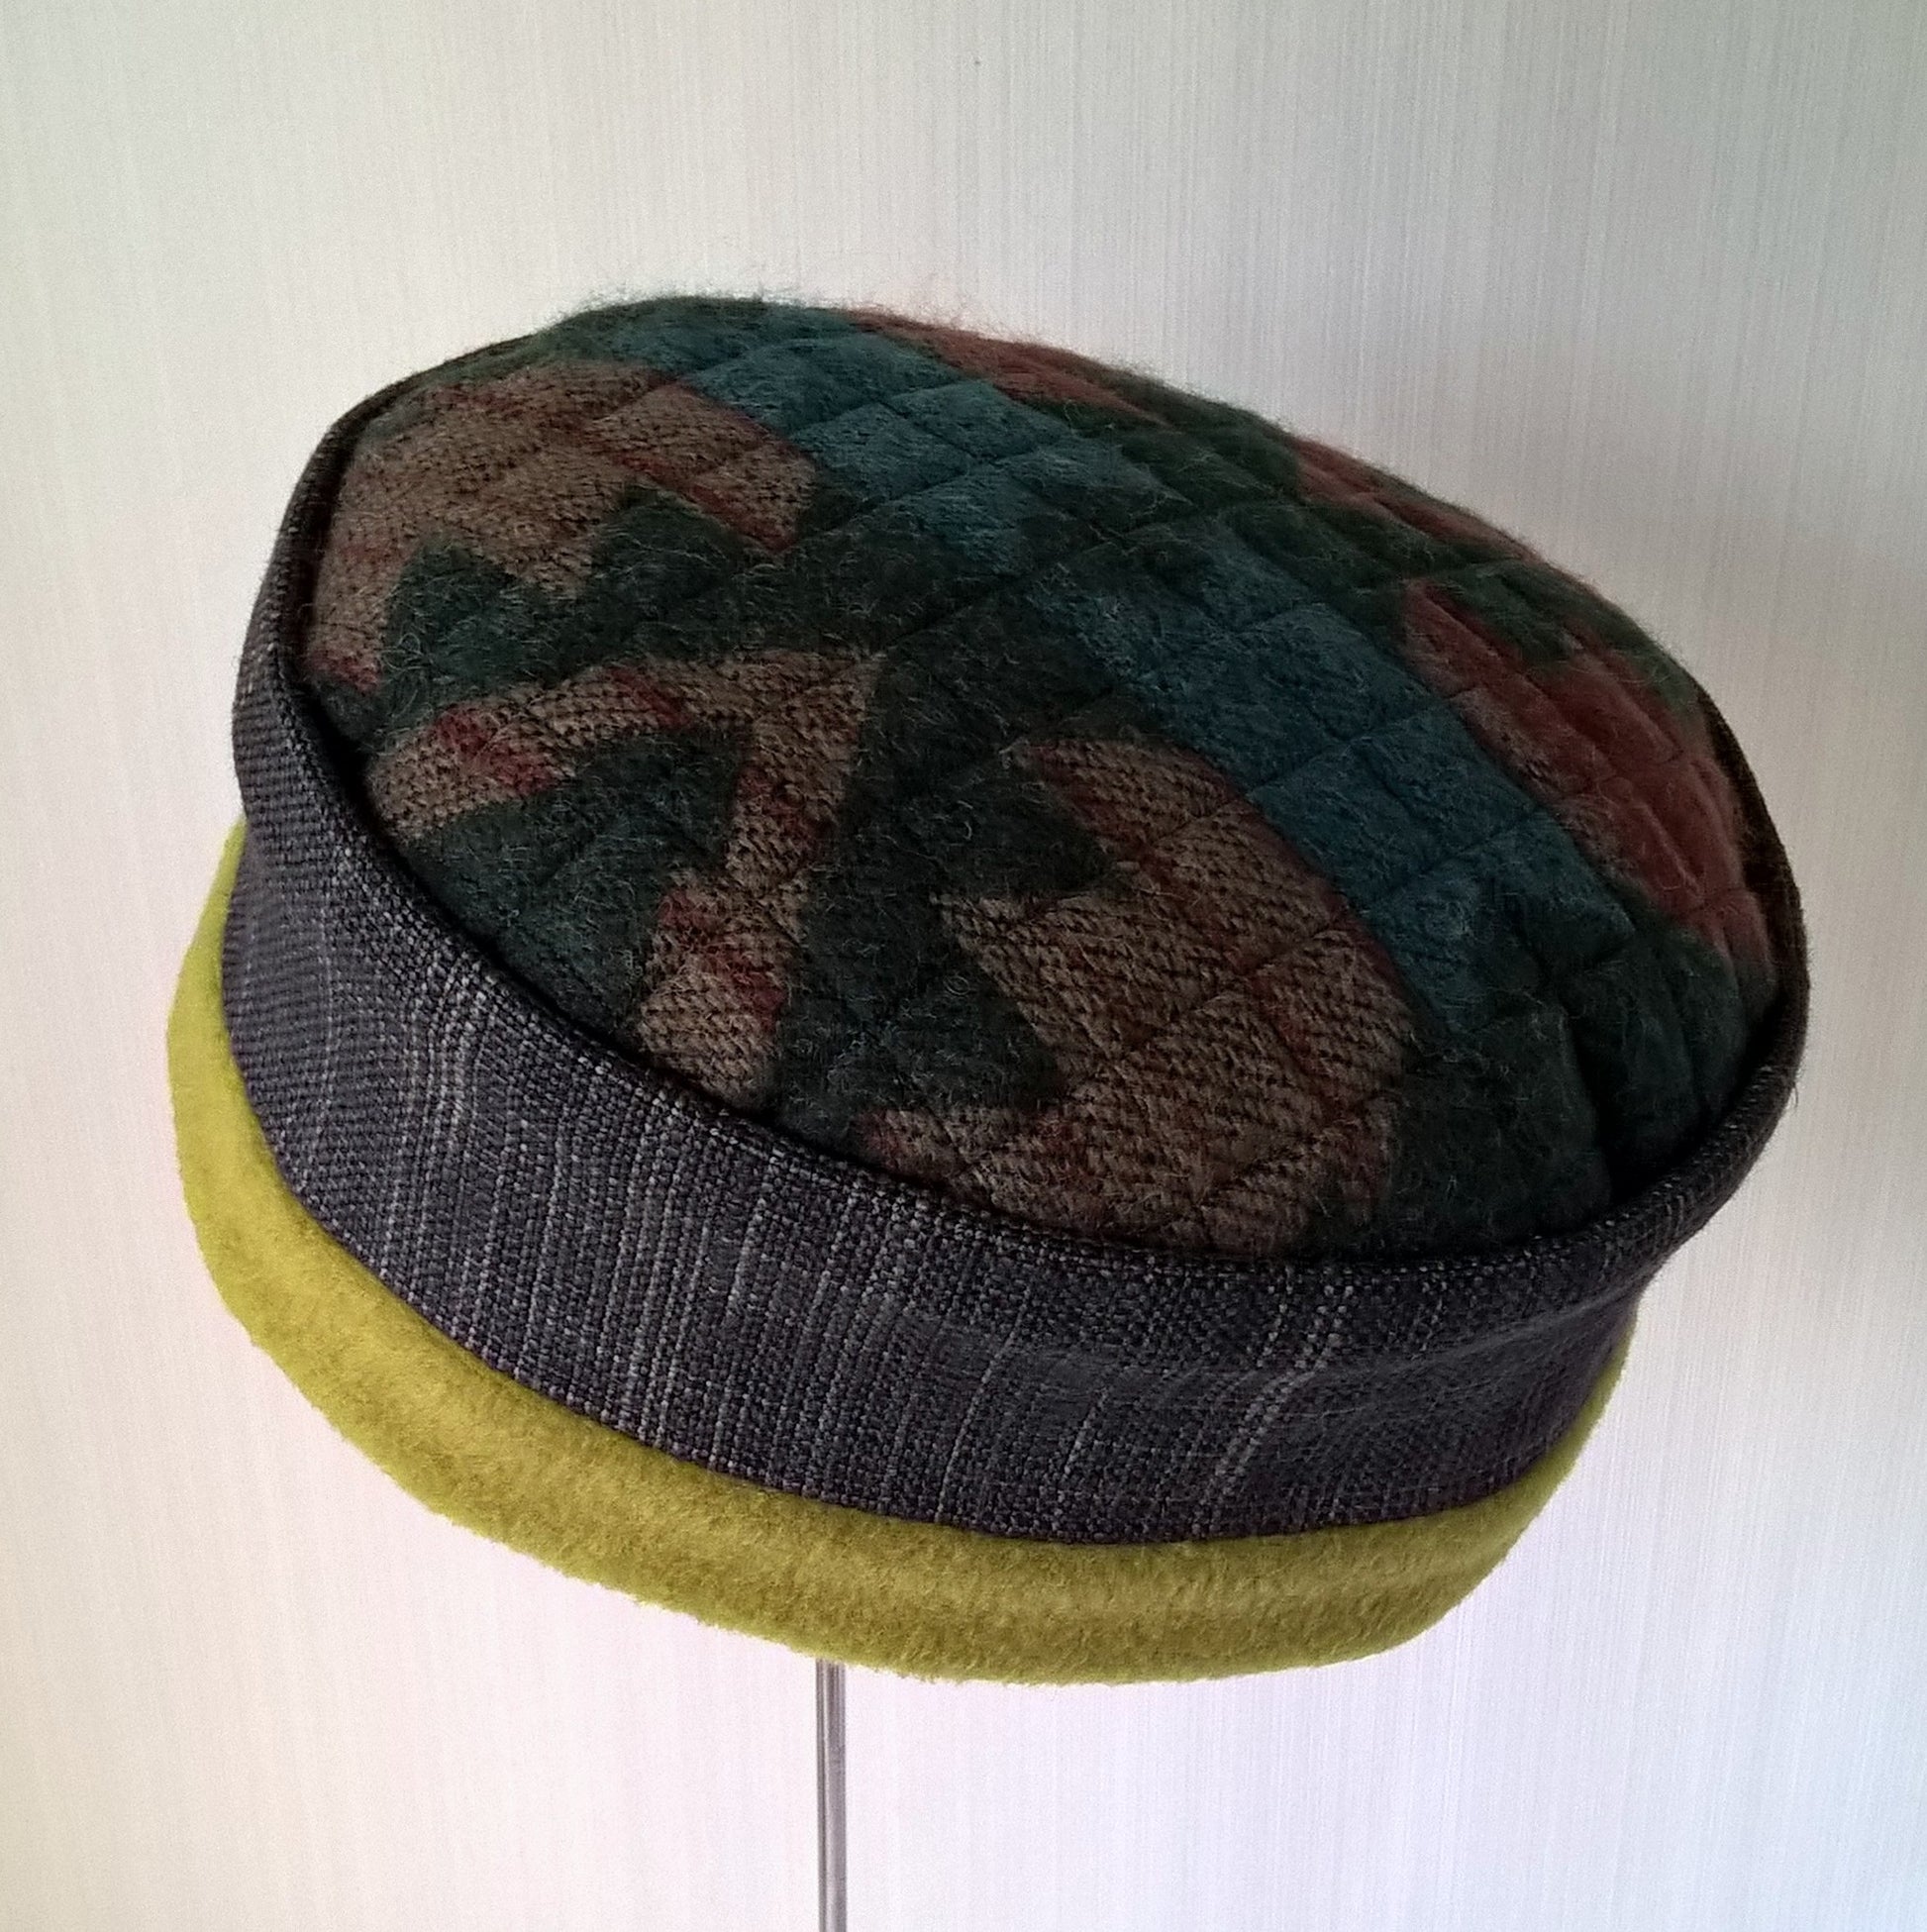 Quilted fleece hat with Aztec style pattern